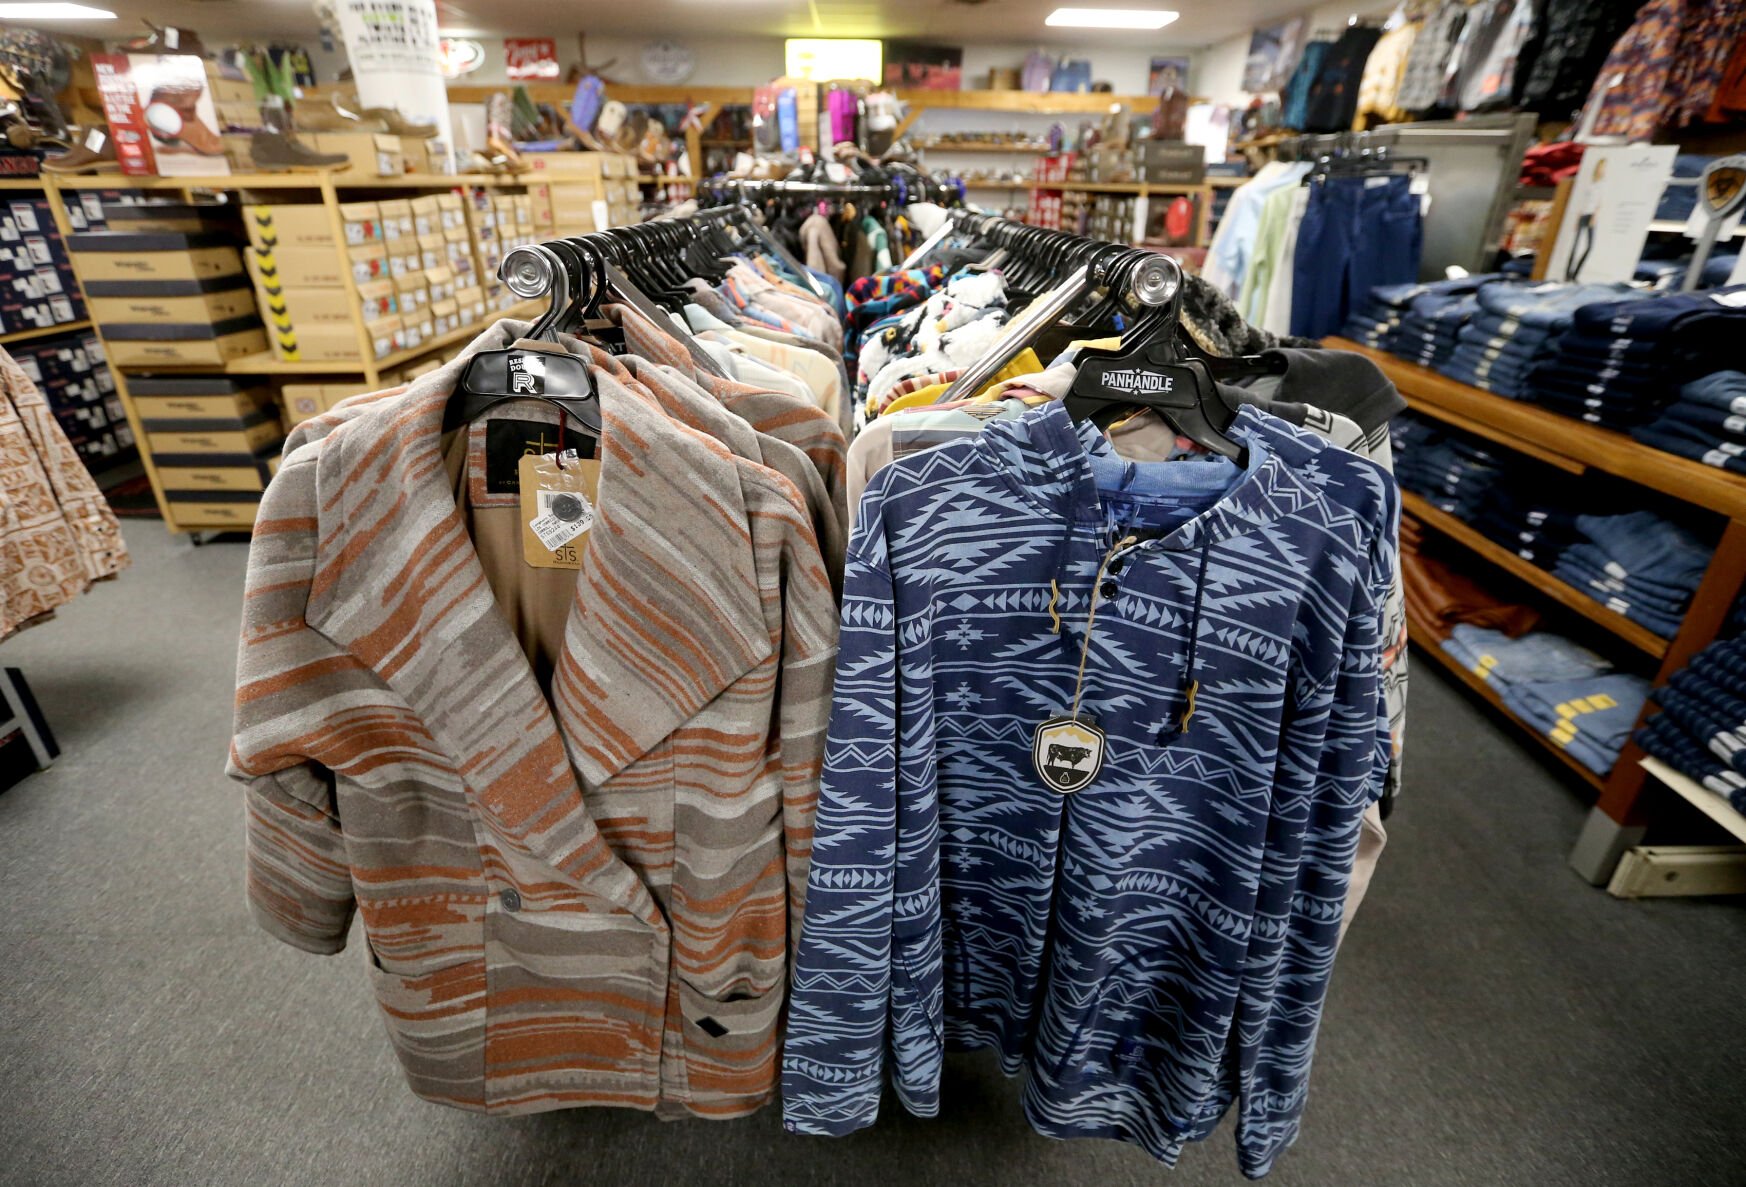 Clothing is displayed at Longhorn Saddlery in Dubuque on Friday, Dec. 30, 2022.    PHOTO CREDIT: JESSICA REILLY